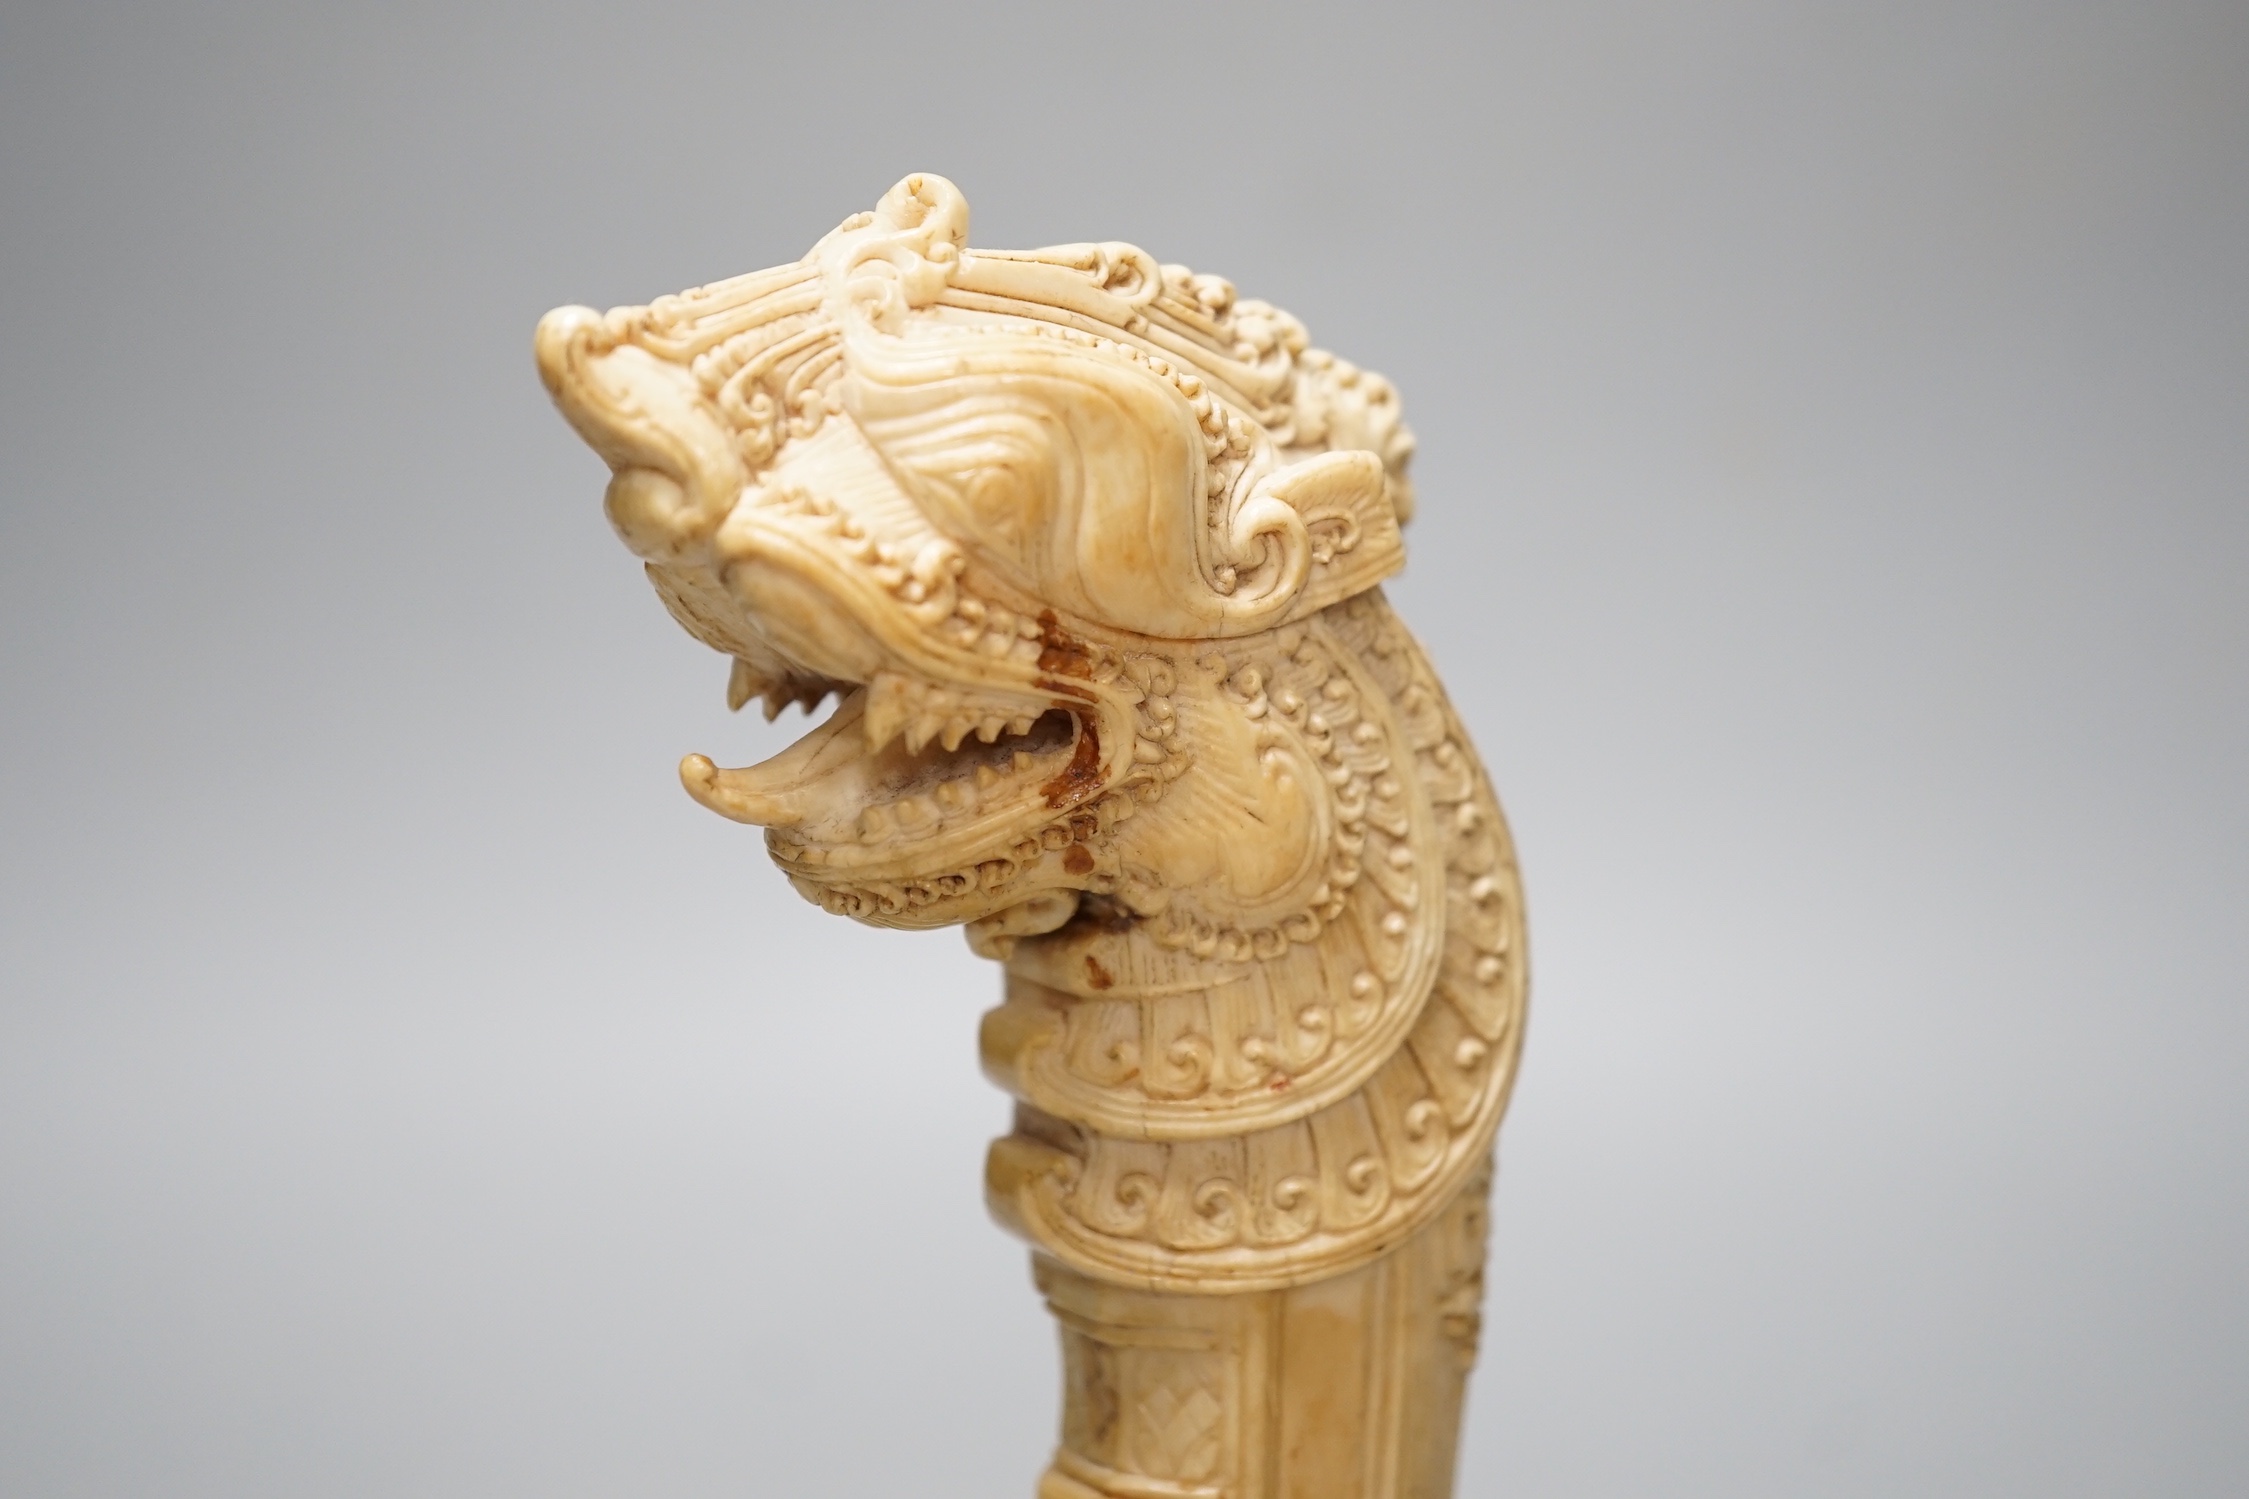 A dagger hilt carved in ivory from Sri Lanka, 17th / 18th century and it is 13cm high.